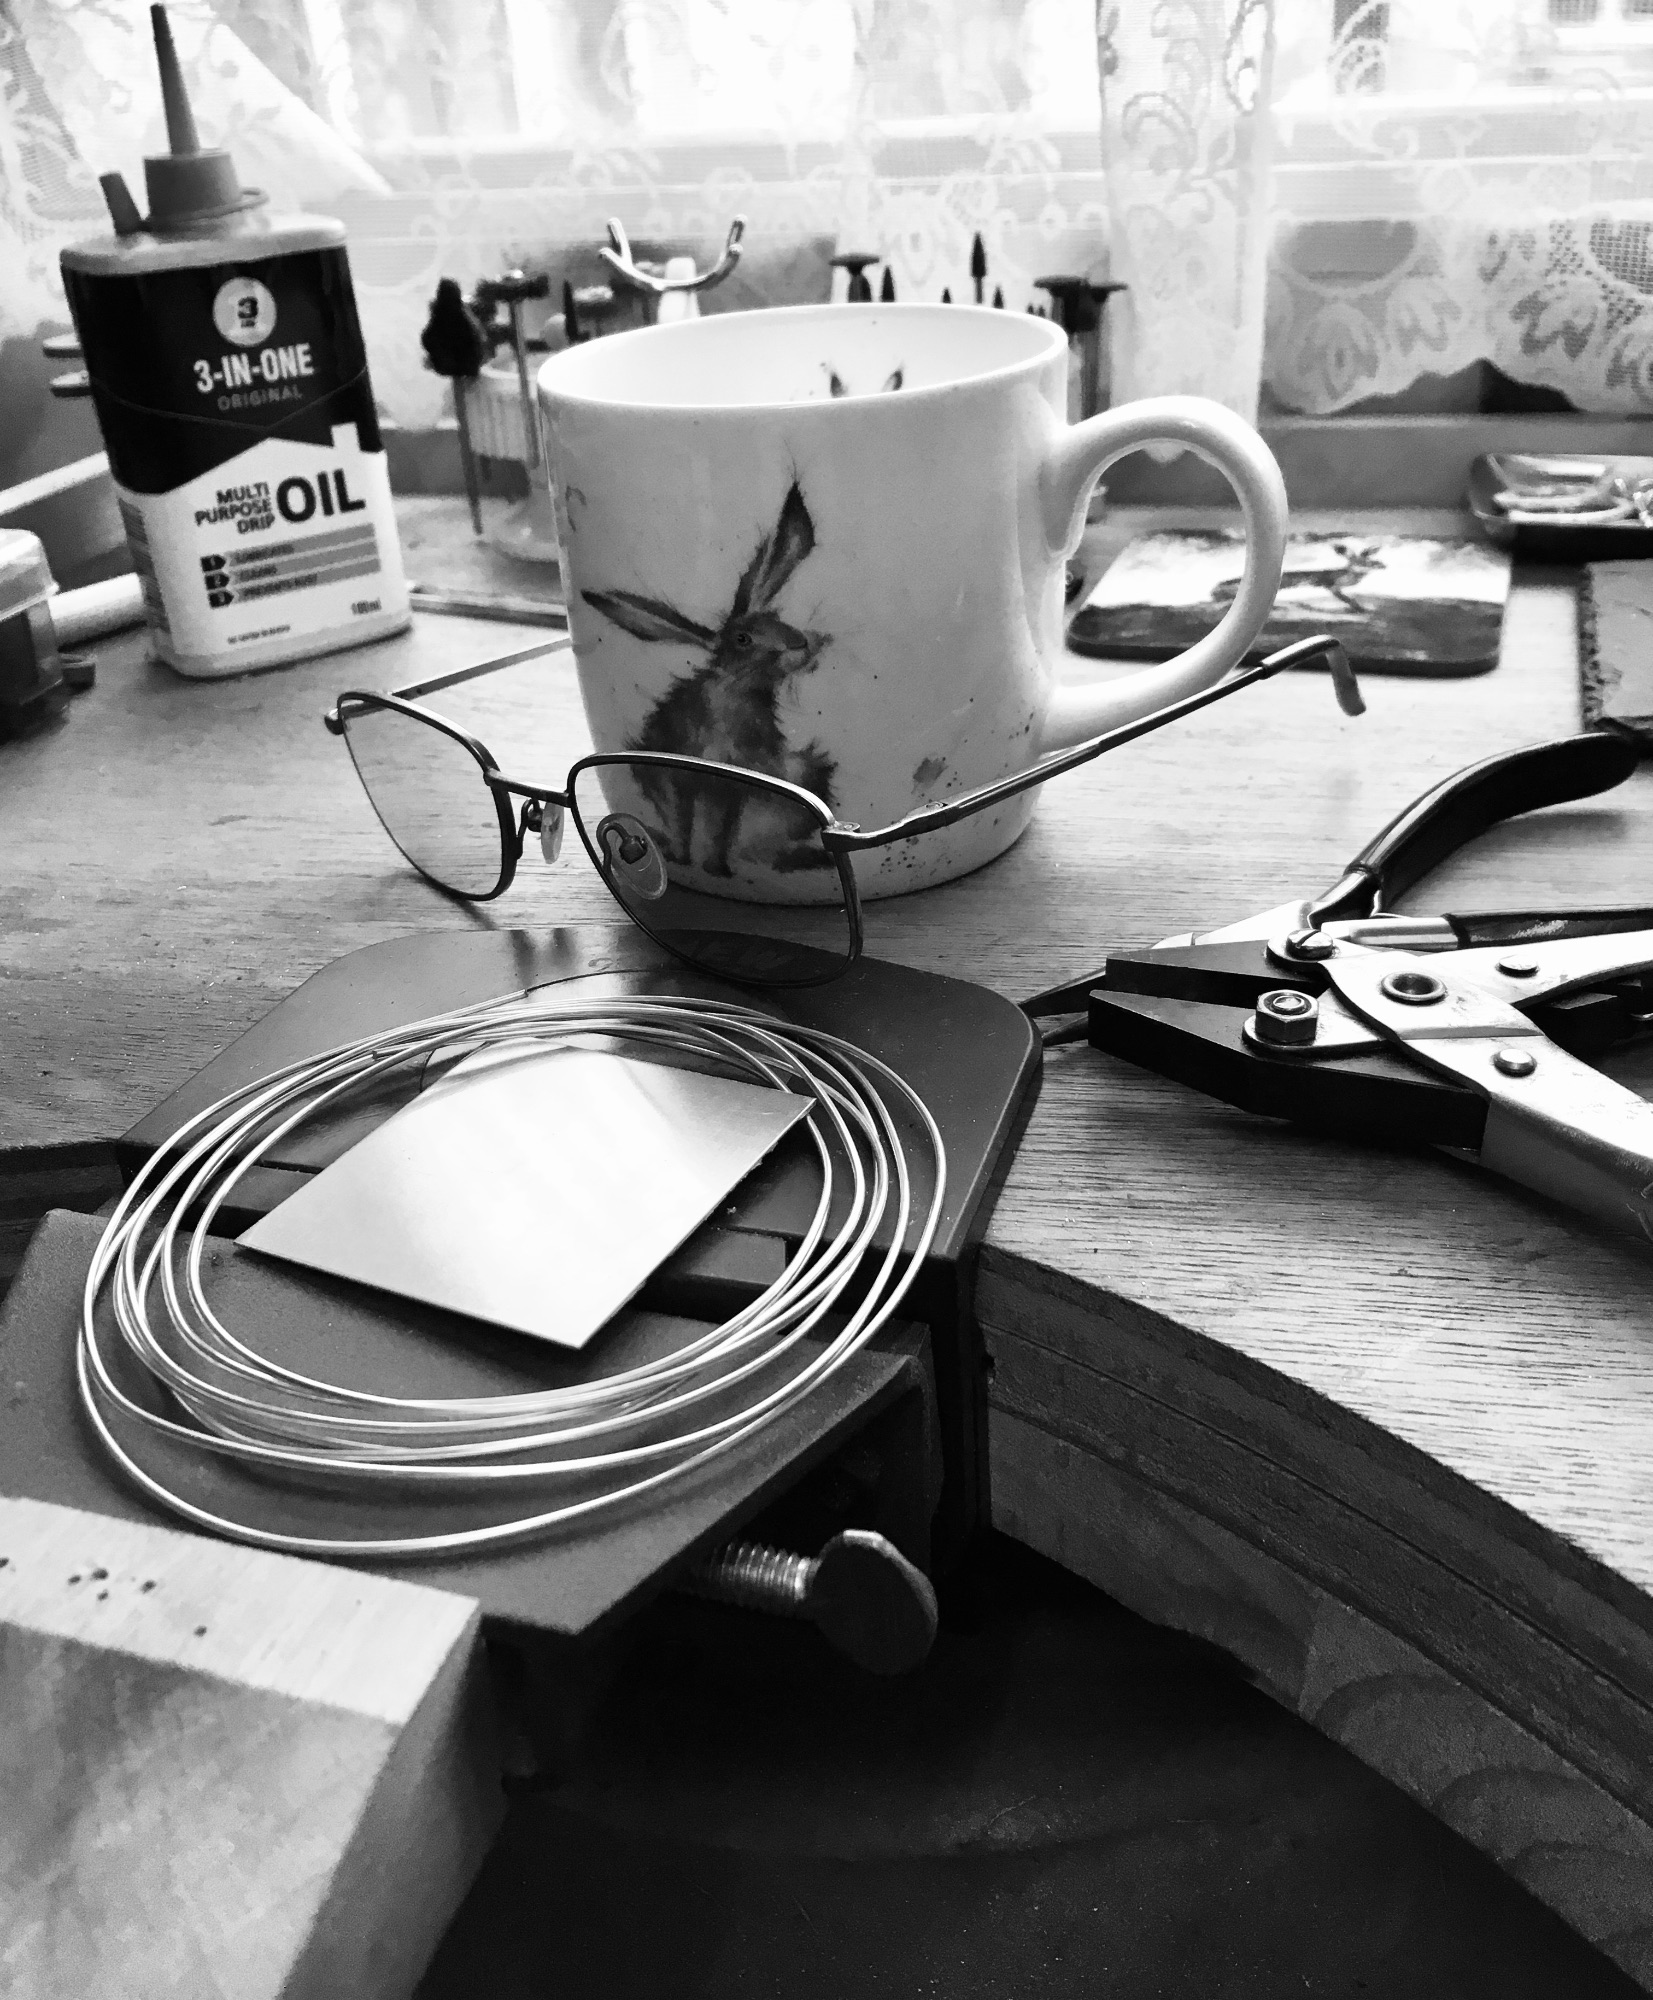 A mug, glasses, tools and sterling silver on a jewellers bench